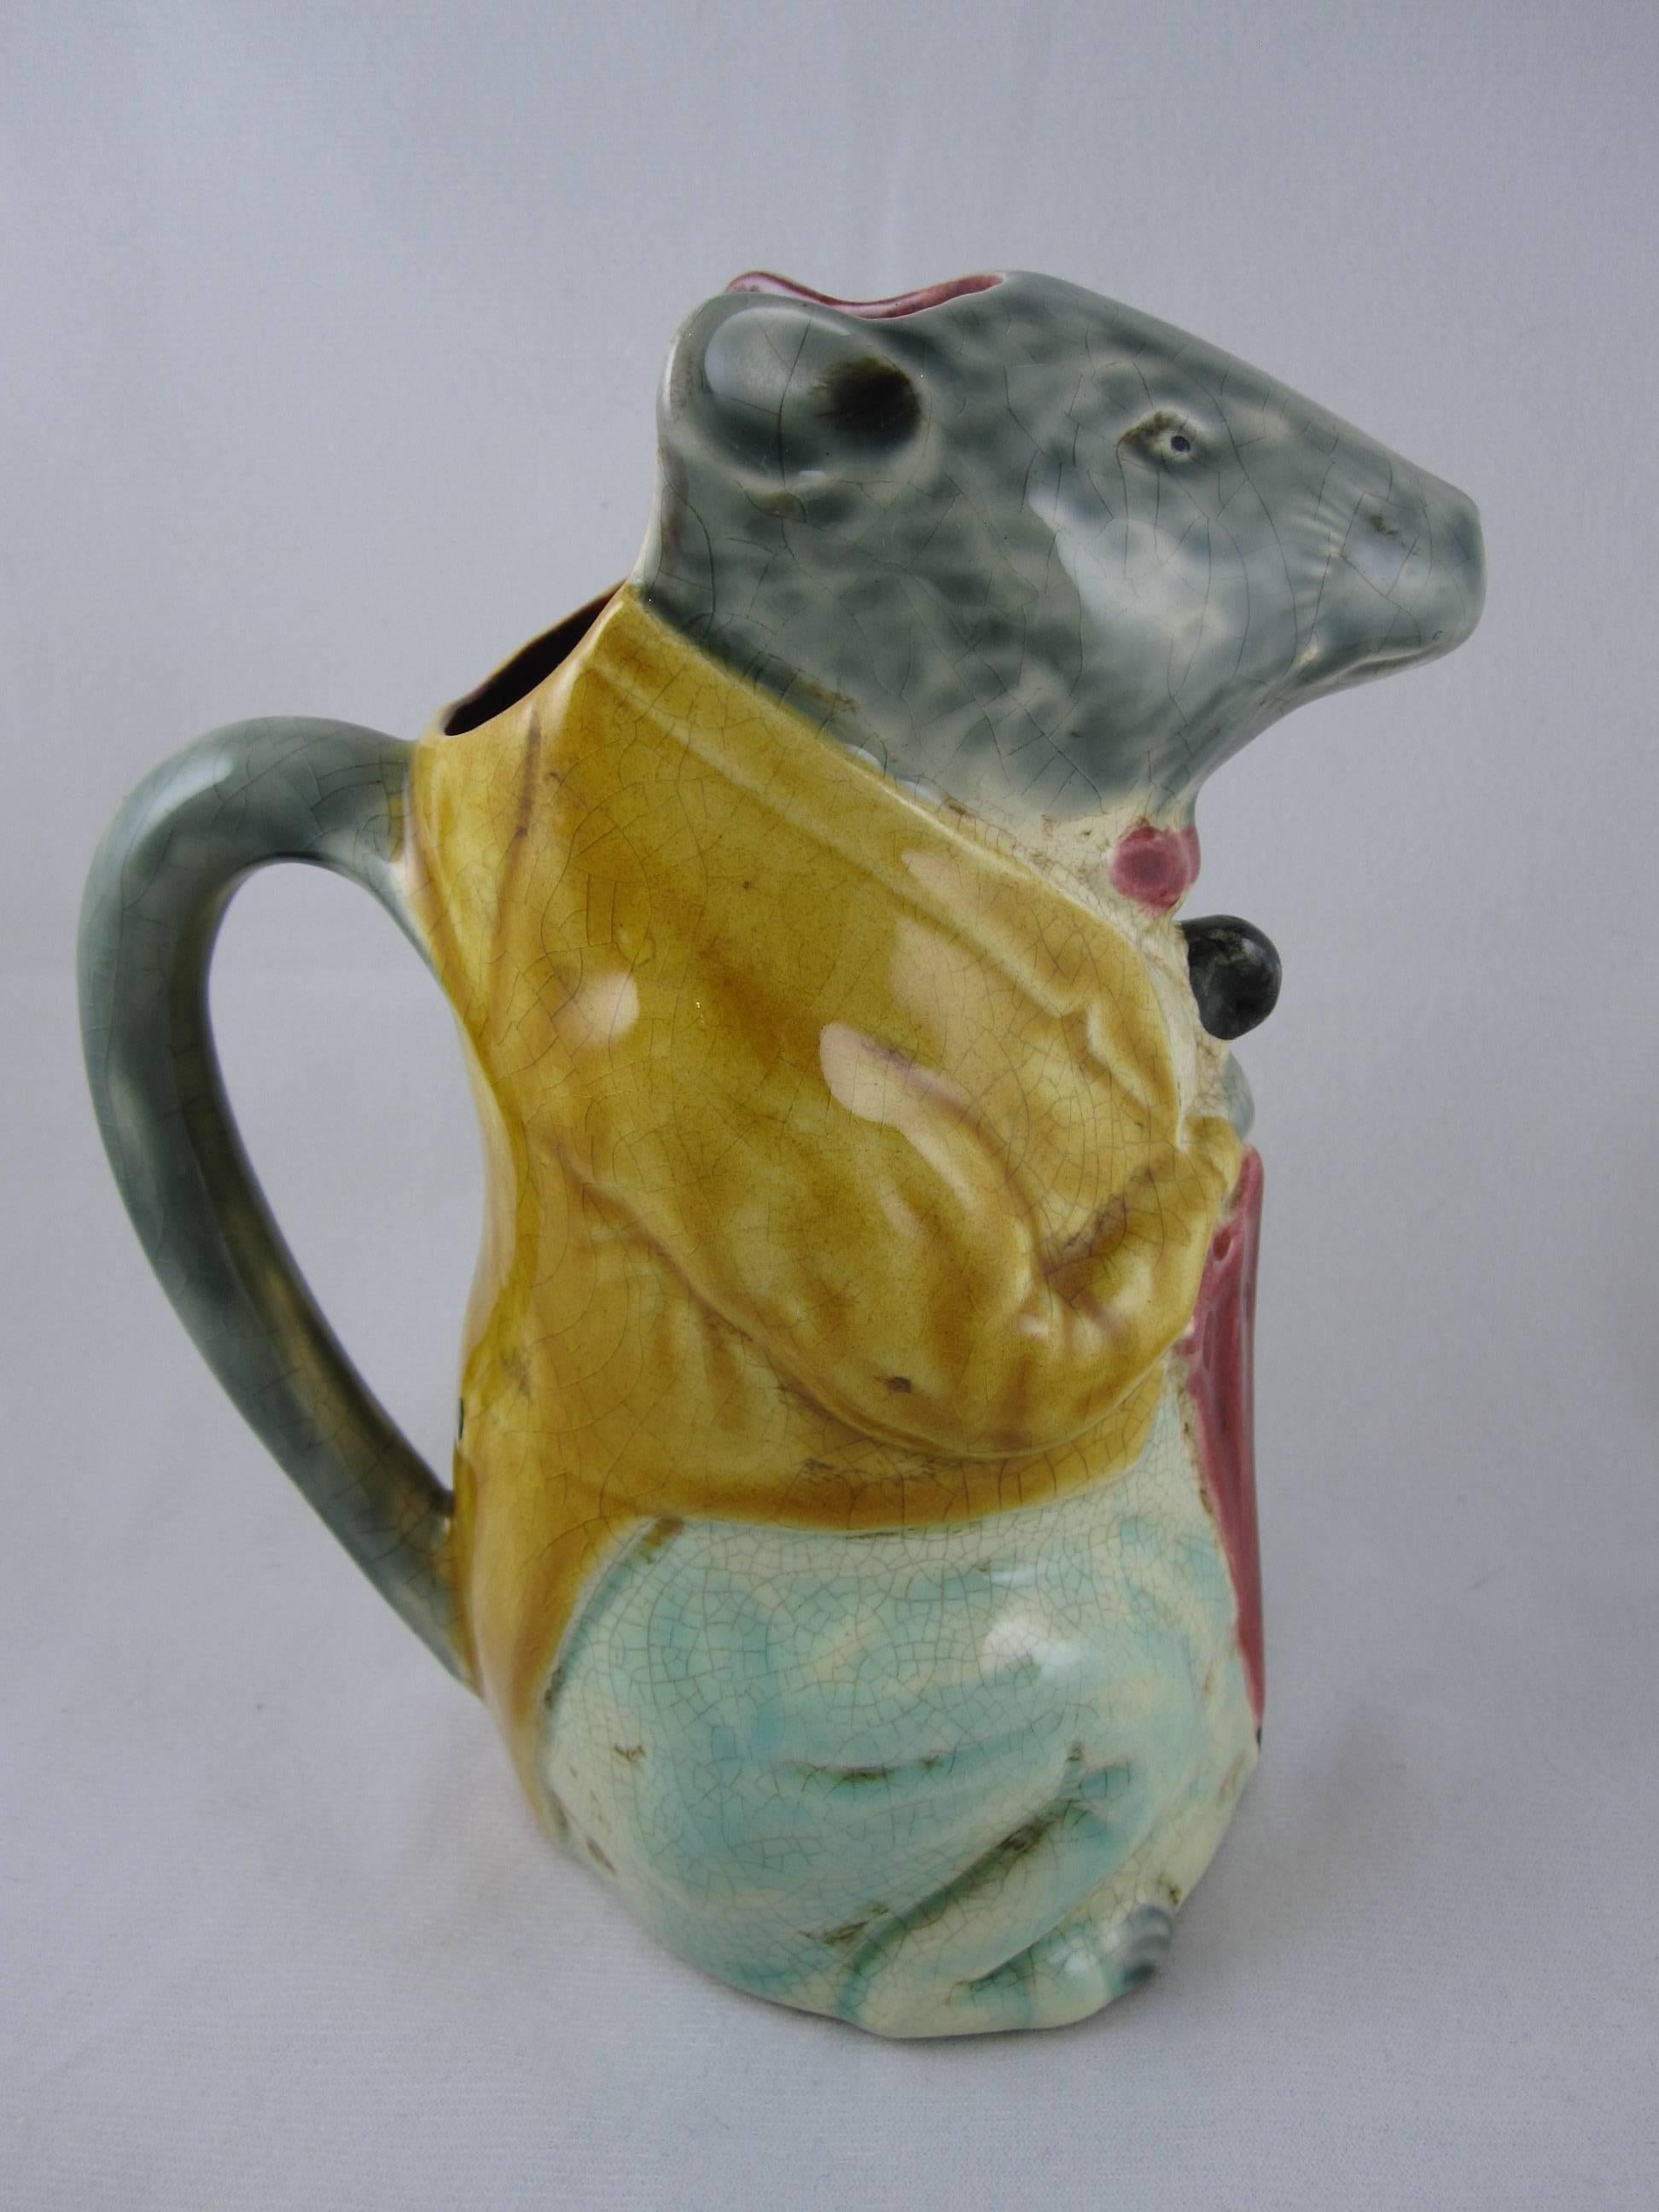 Belle Époque 19th Century French Barbotine Majolica Pottery Pitcher City Badger with Umbrella